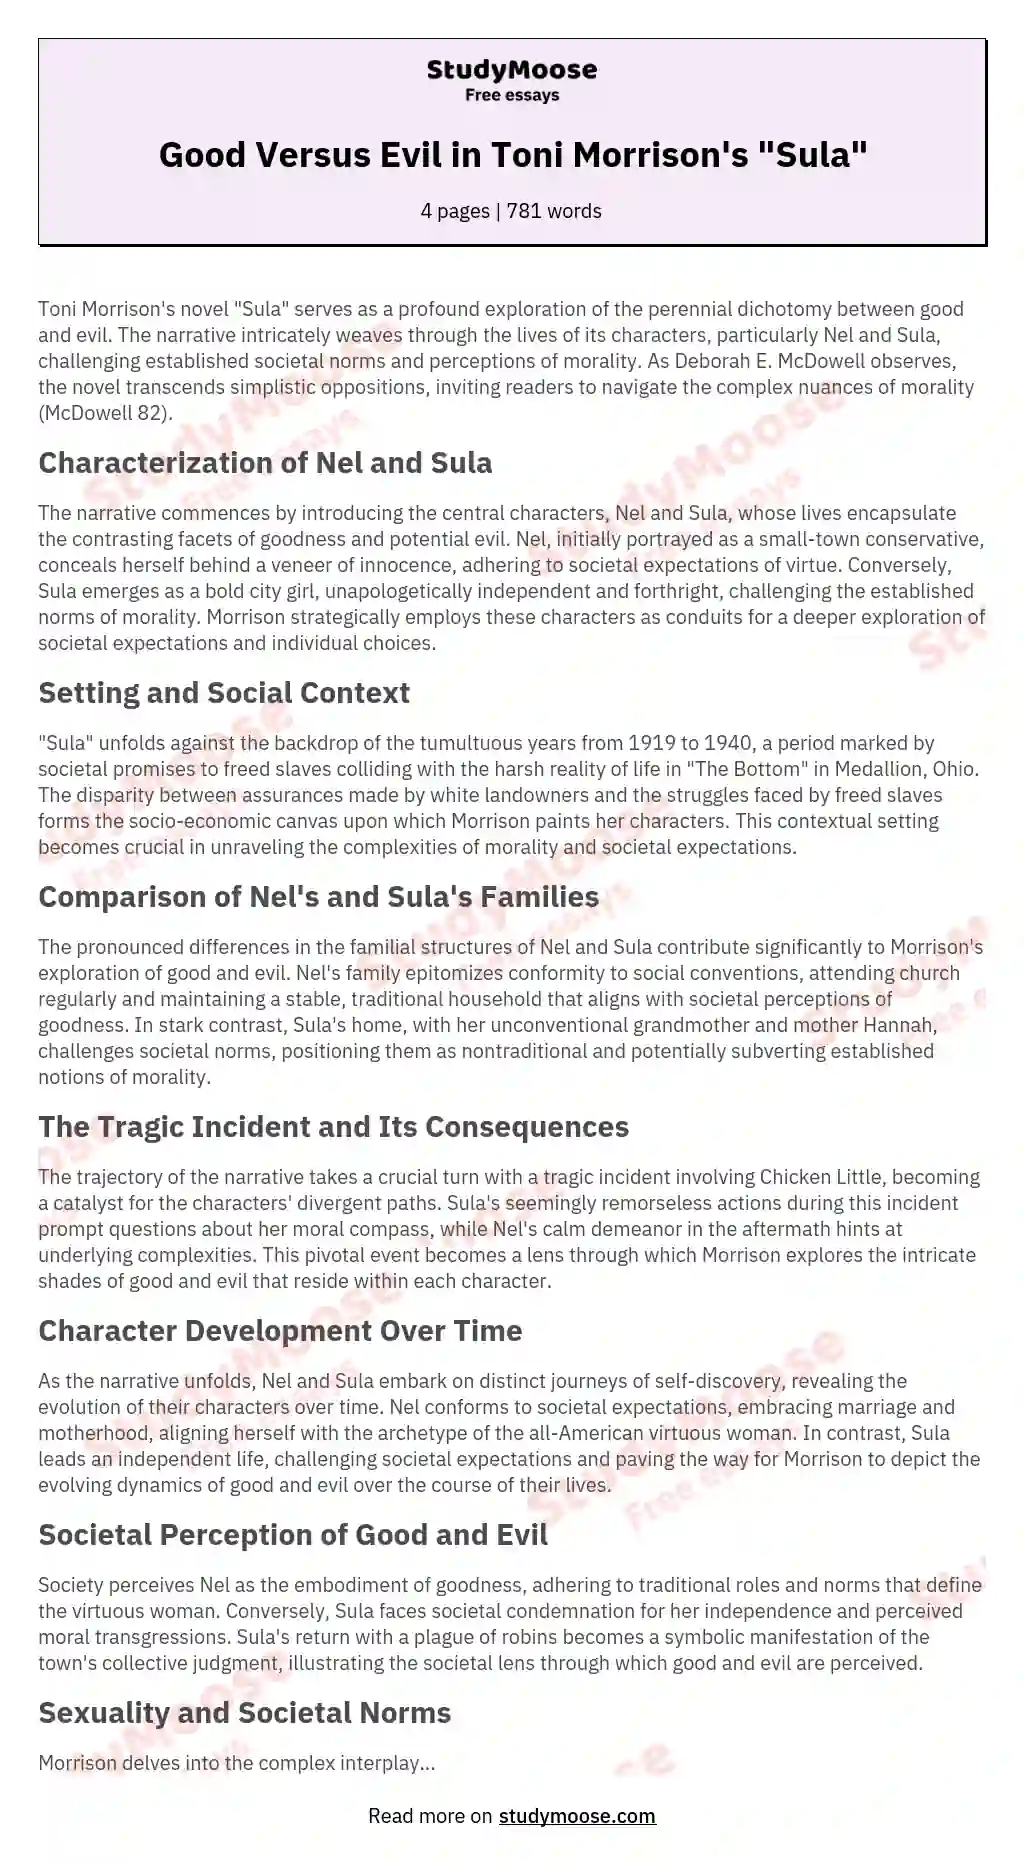 Behavior and Qualities of Characters in Novel Sula